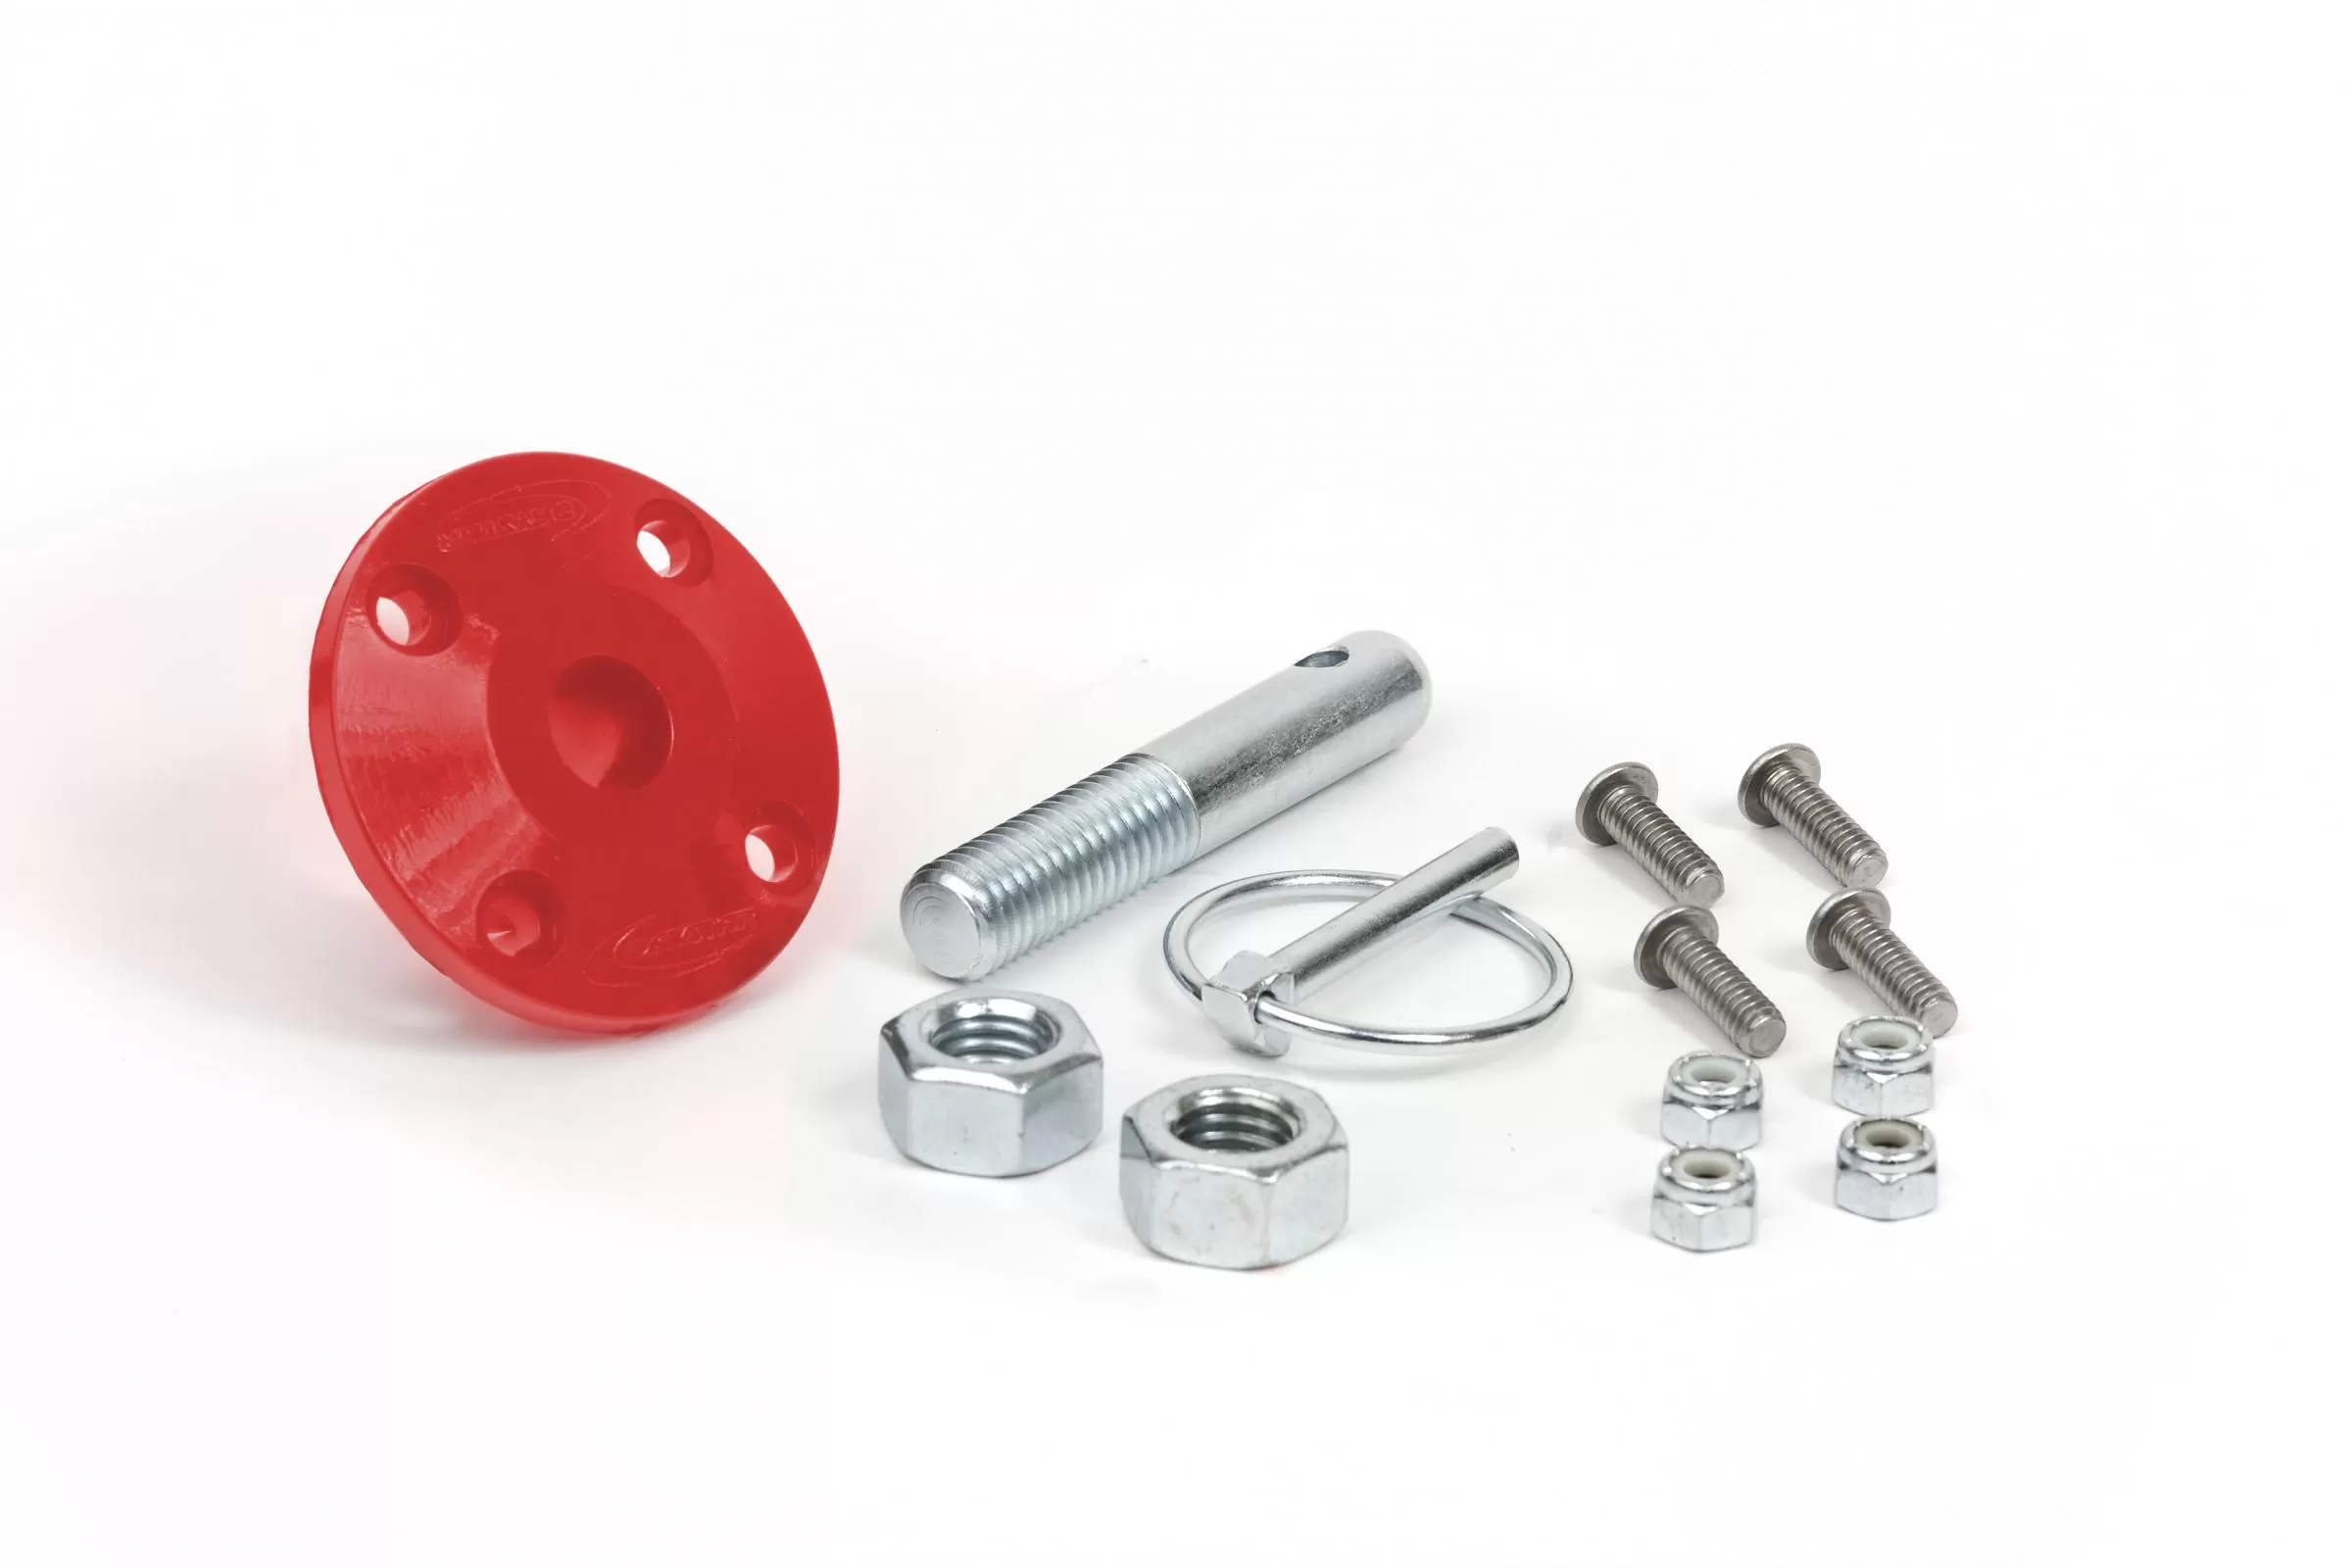 Daystar Hood Pin Kit Red Single with Polyurethane Isolator Pin Spring Clip and Related Hardware - KU71104RE